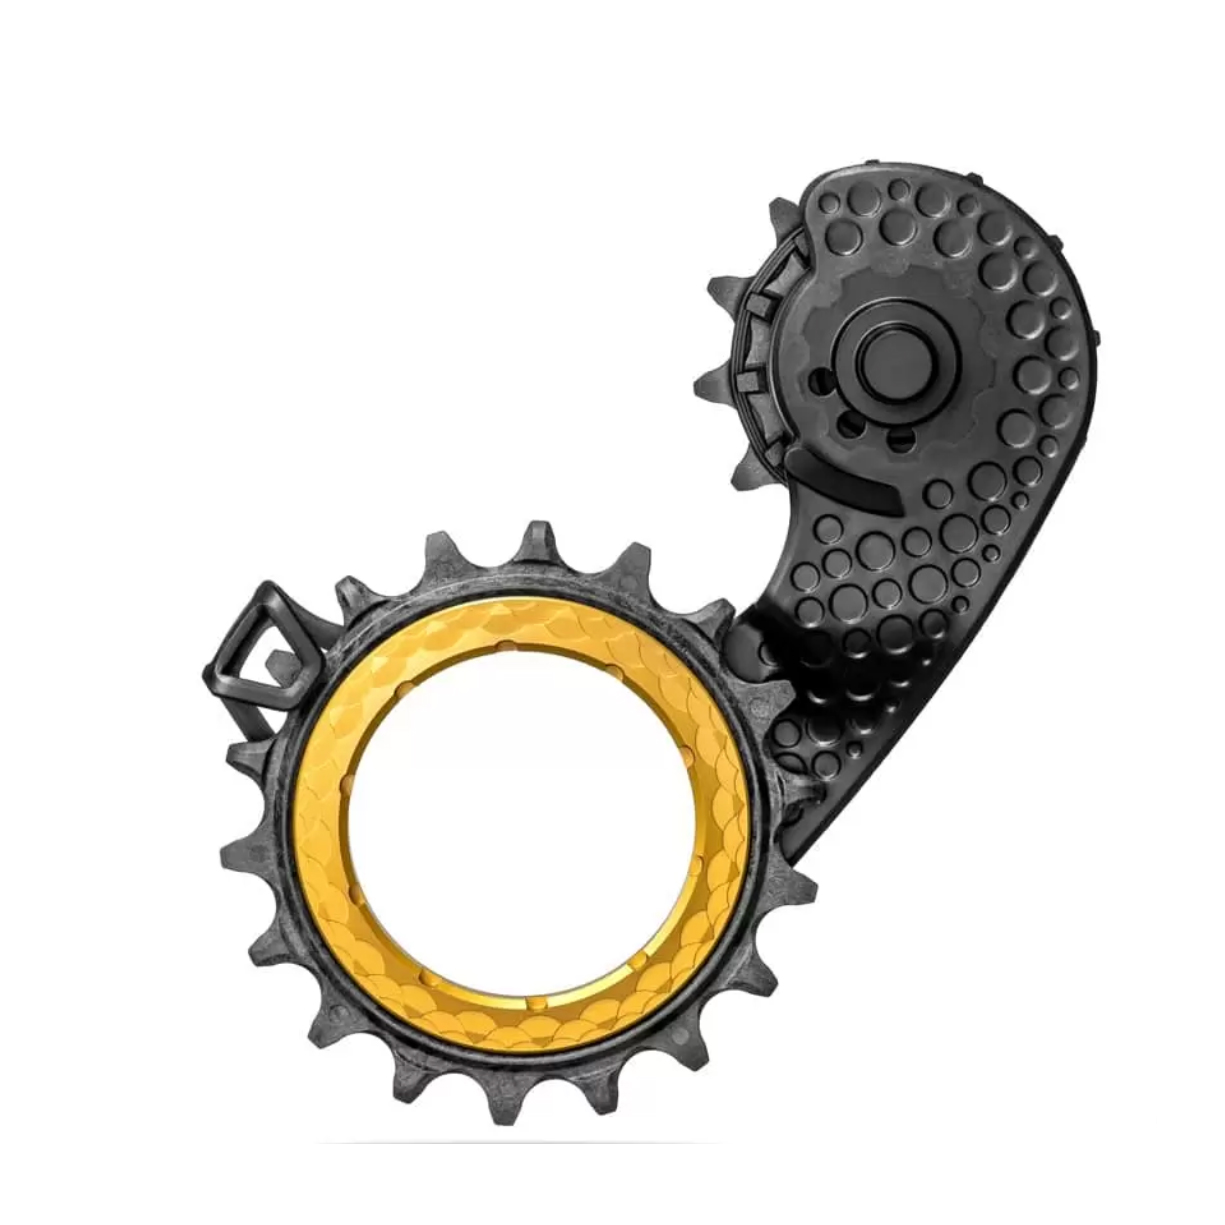 Absolute Black Carbon-Ceramic Hollow Cage, SRAM AXS - Gold